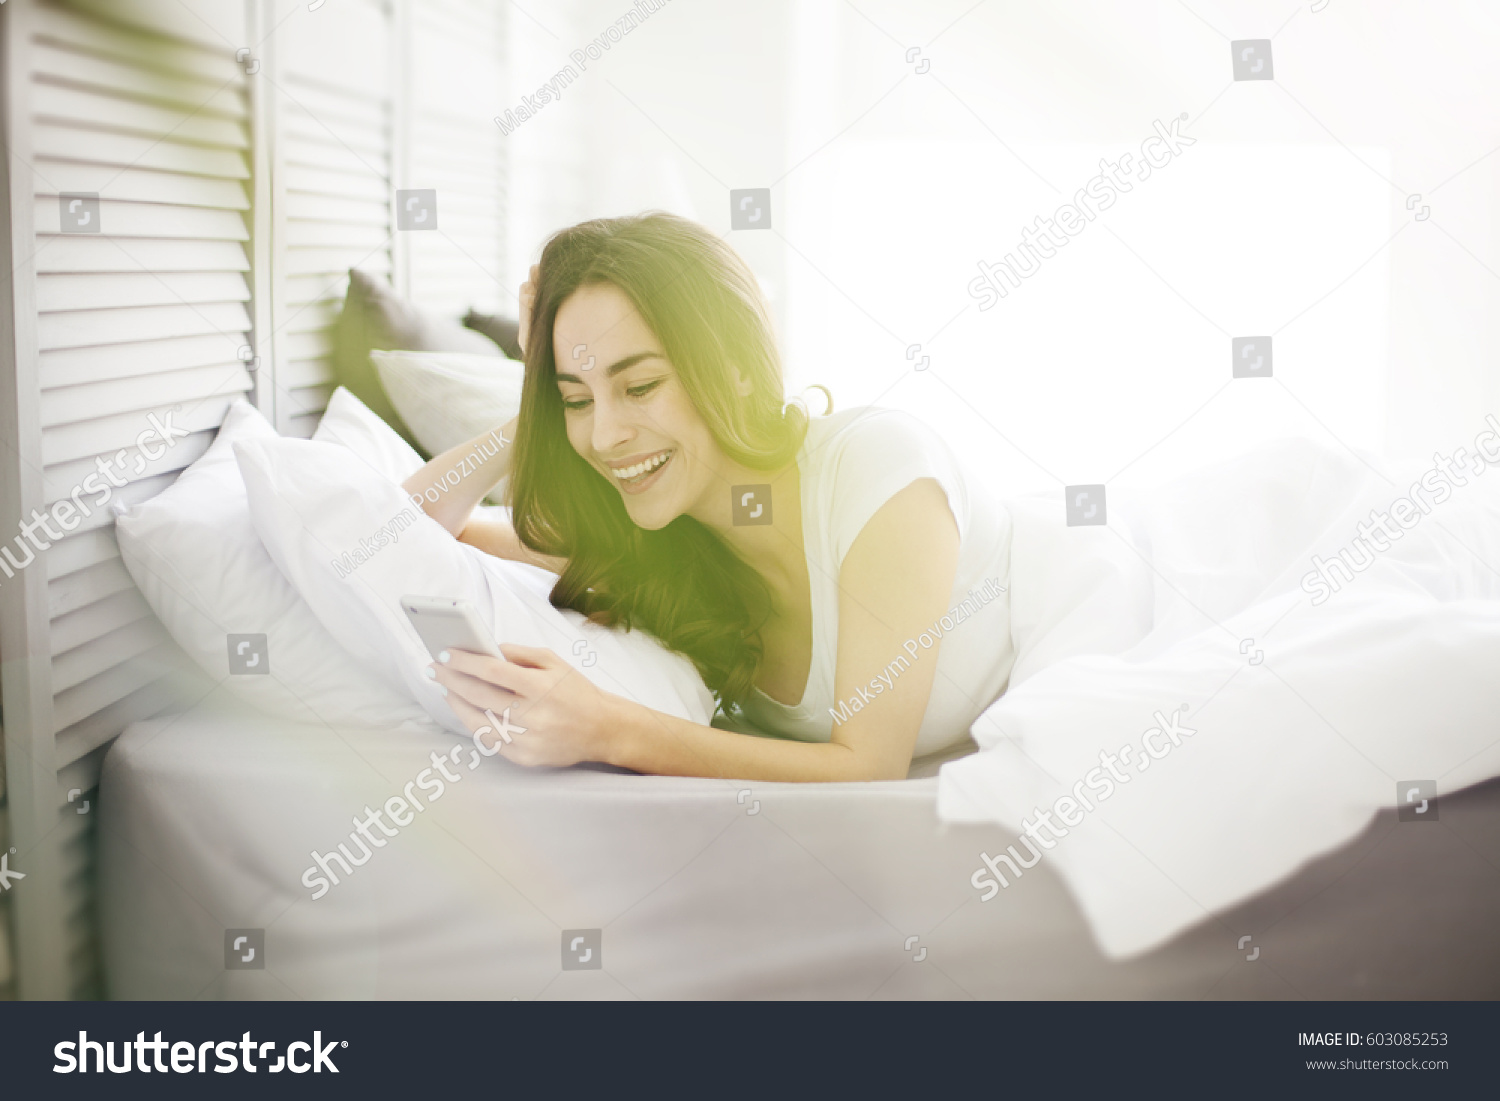 Happy brunette girl using a mobile phone lying on the white bed at home with a window in the background. #603085253